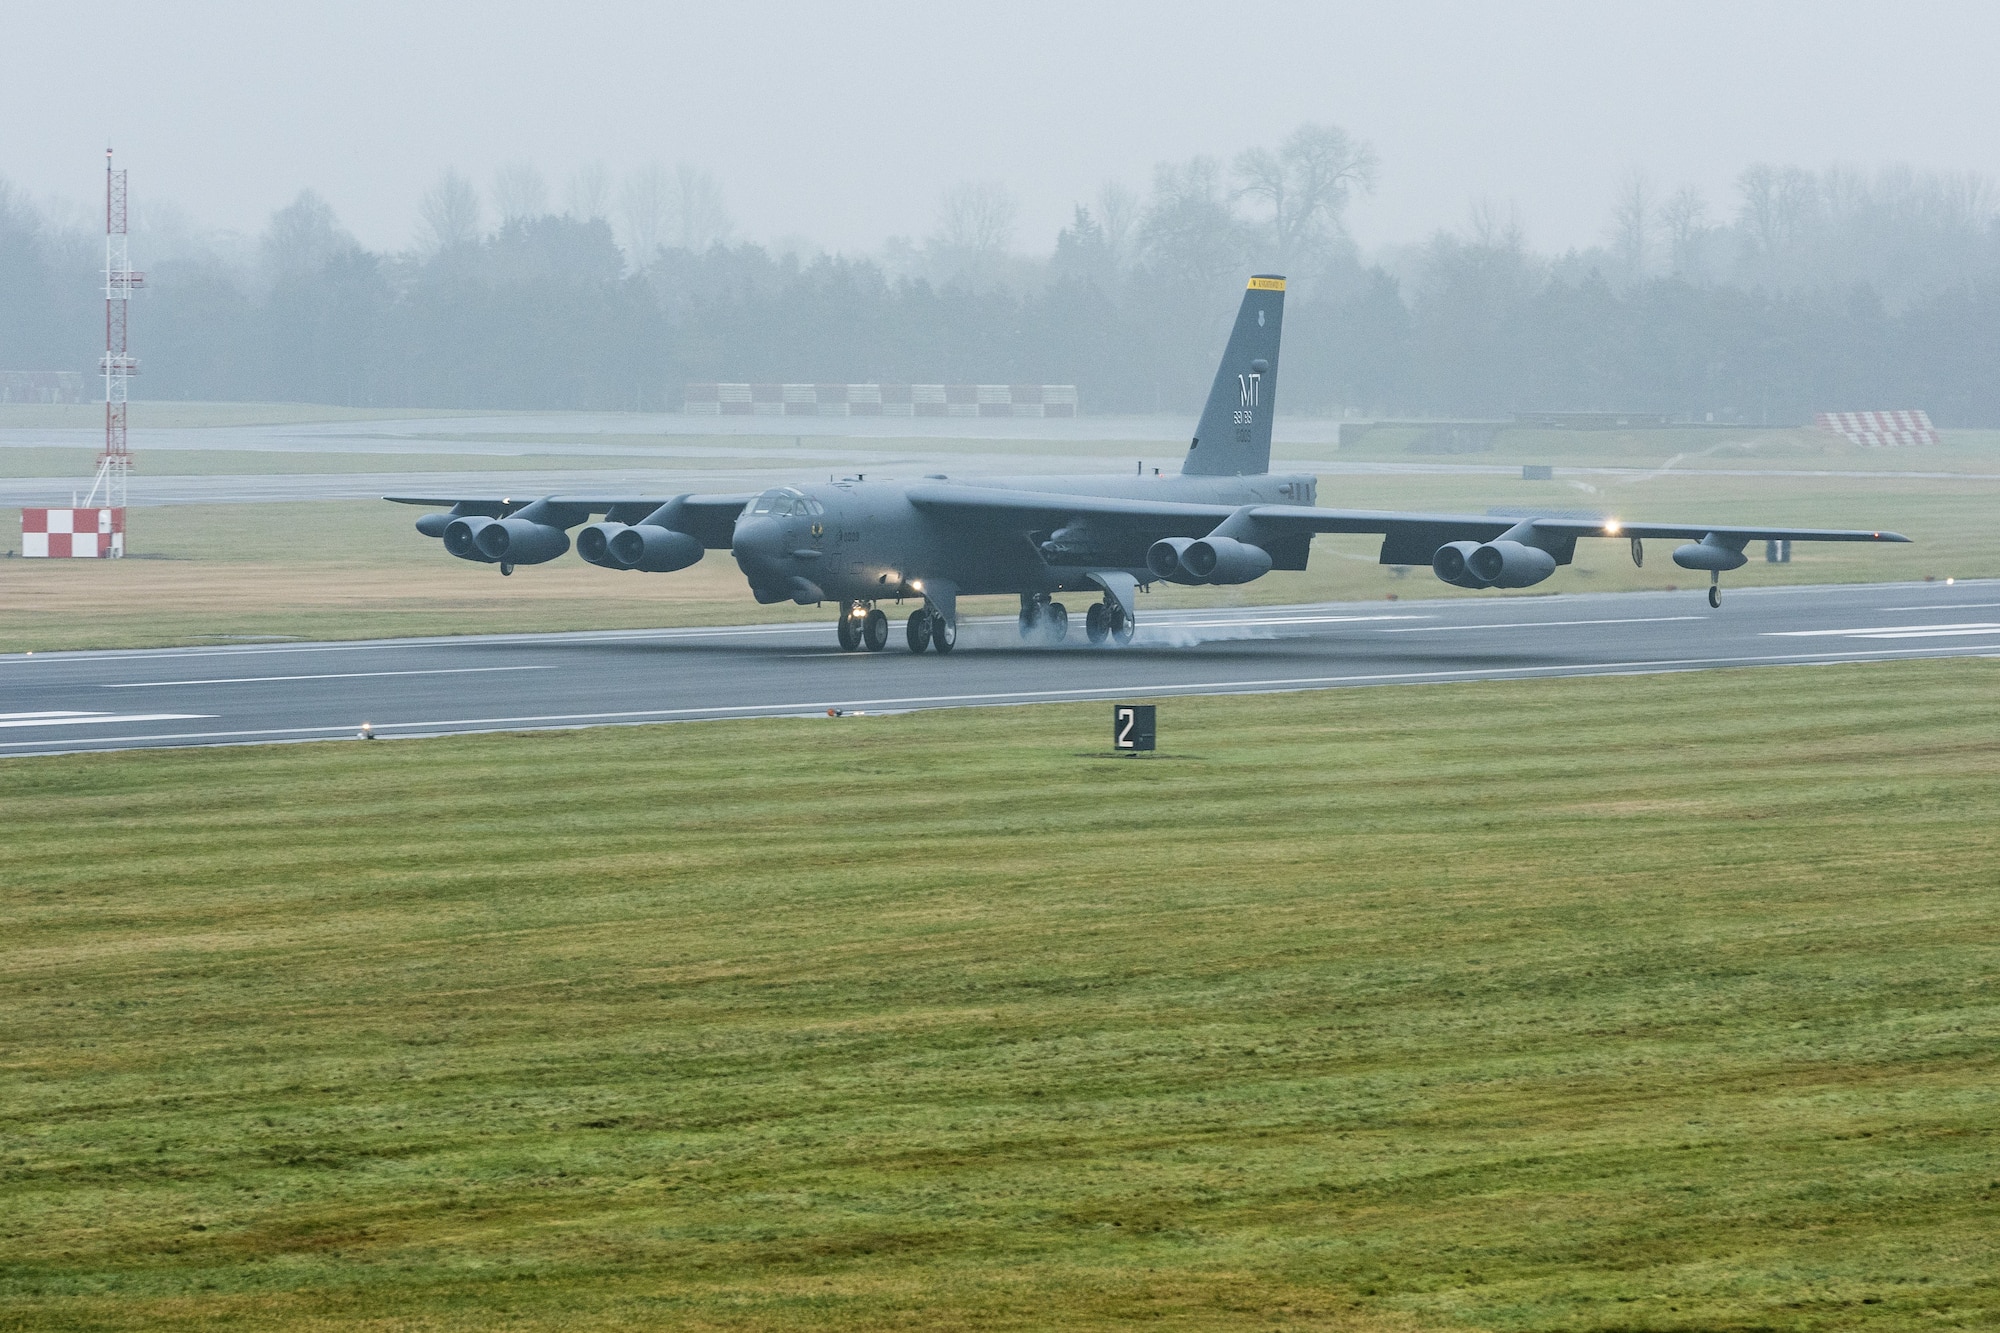 A B-52H Stratofortress assigned to Air Force Global Strike Command touches down at RAF Fairford, England, Jan. 9, 2018. The deployment of strategic bombers to RAF Fairford helps exercise the base as United States Air Forces in Europe’s forward operating location for bombers. (U.S. Air Force photo by Senior Airman J.T. Armstrong)